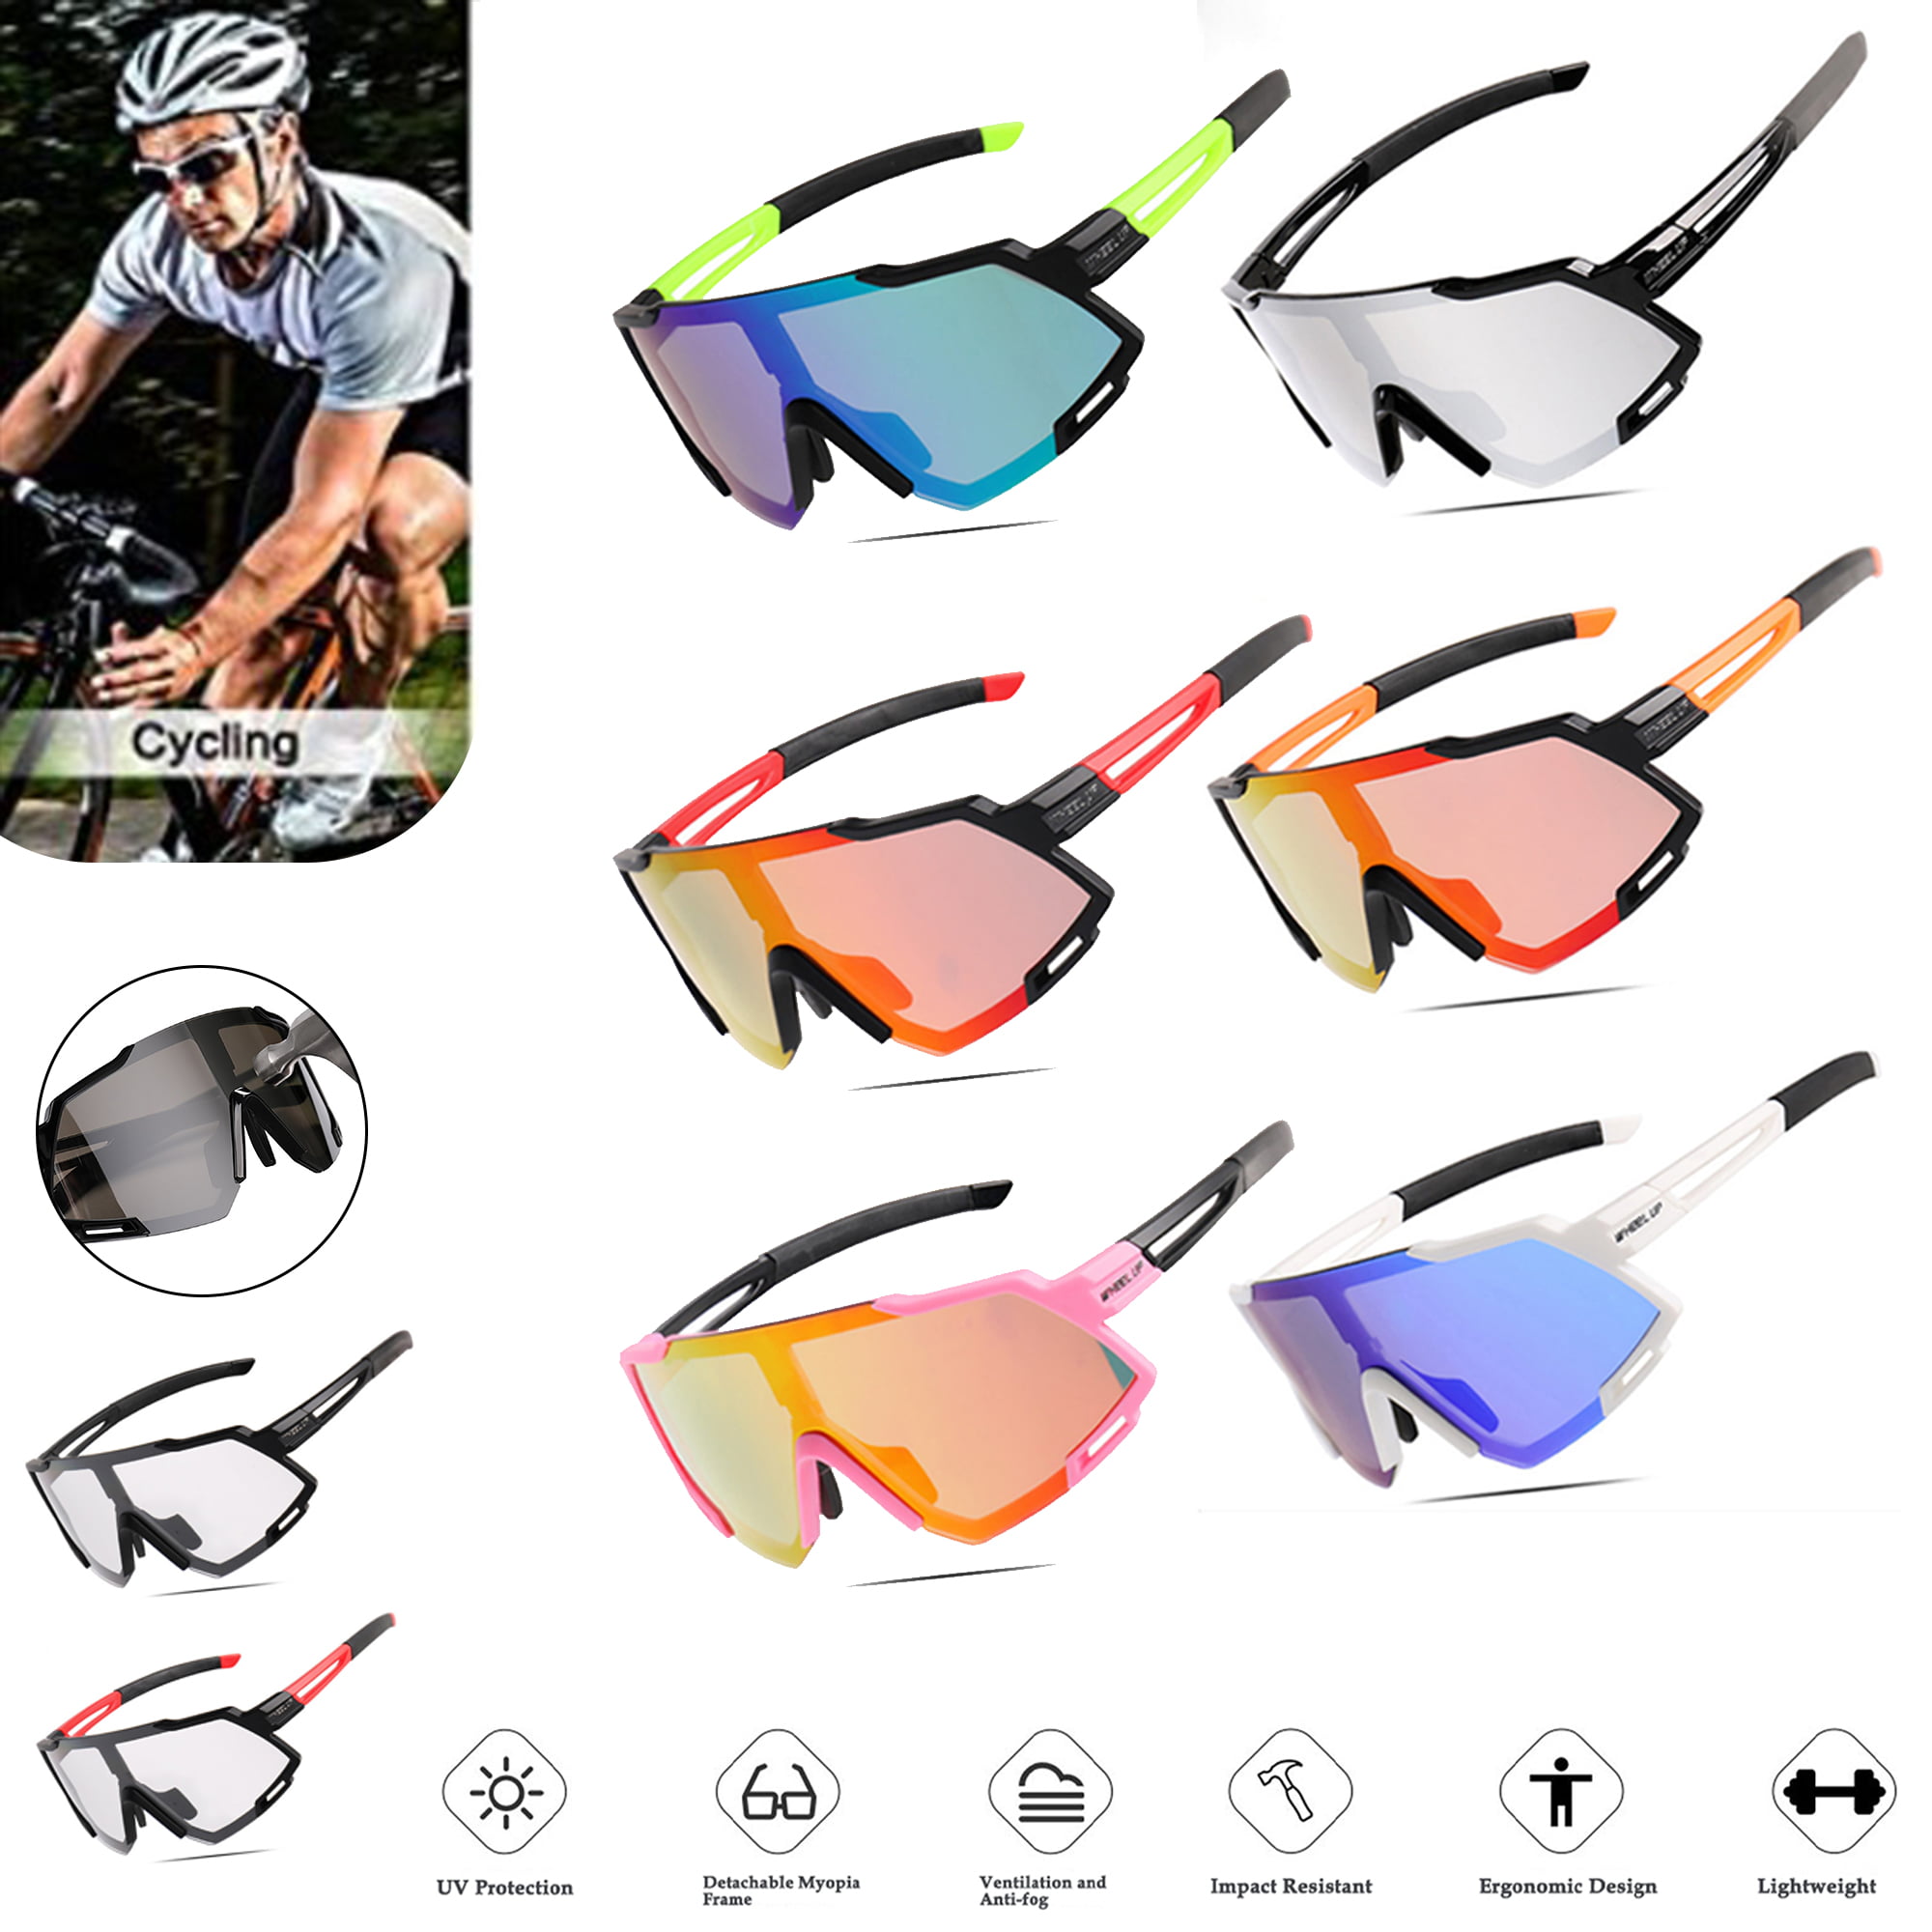 Leegoal Outdoor Cycling Sunglasses Polarized Sports Sunglasses with Case for Men and Women Running/Cycling/Fishing/Hiking with 5 Interchangeable Lenses and Myopia Frame 